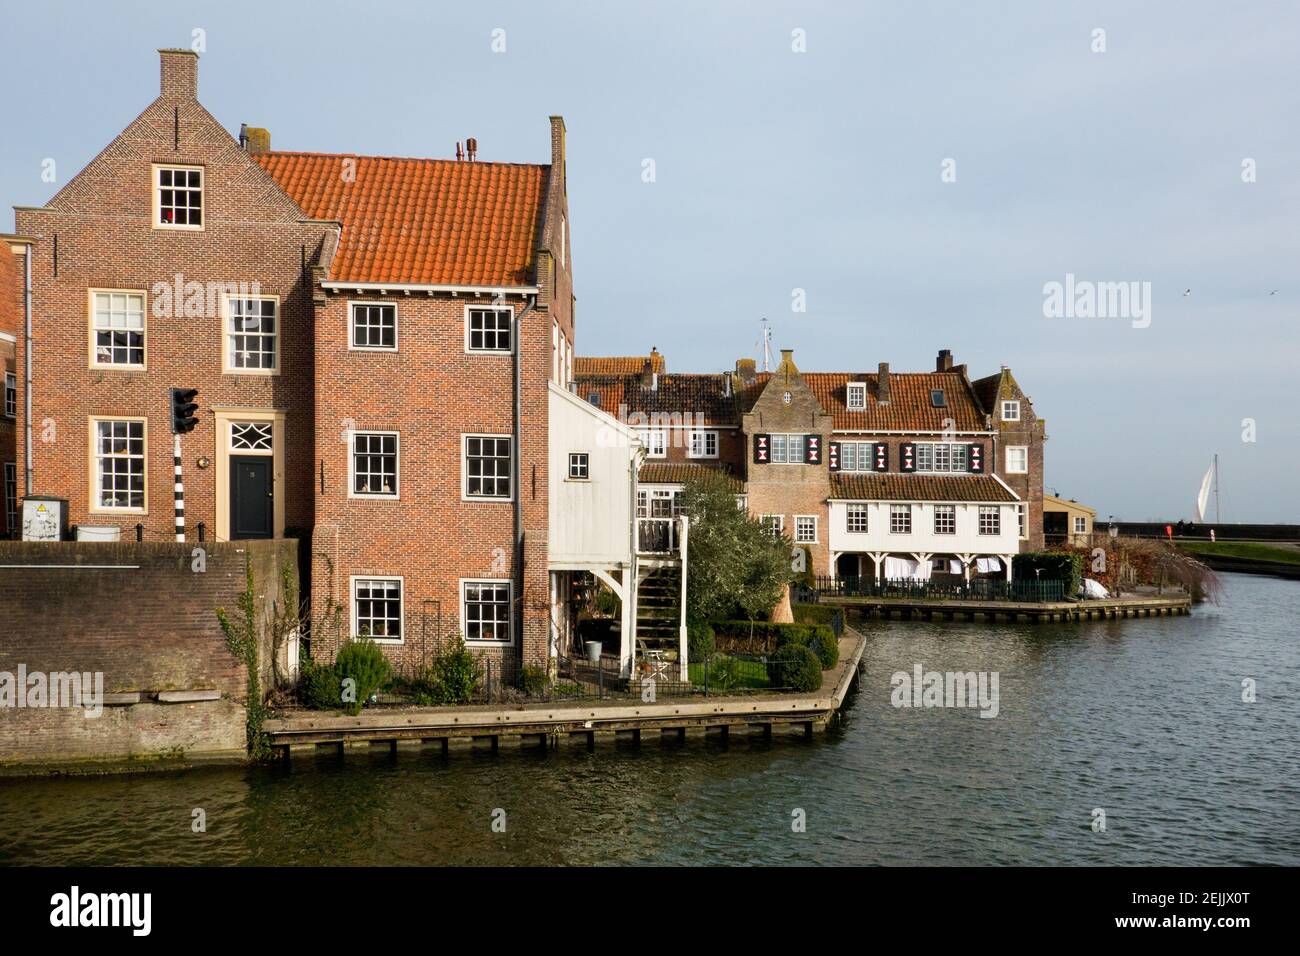 Enkhuizen, historic harbor town, traditional old brick buildings with tile roofs Stock Photo